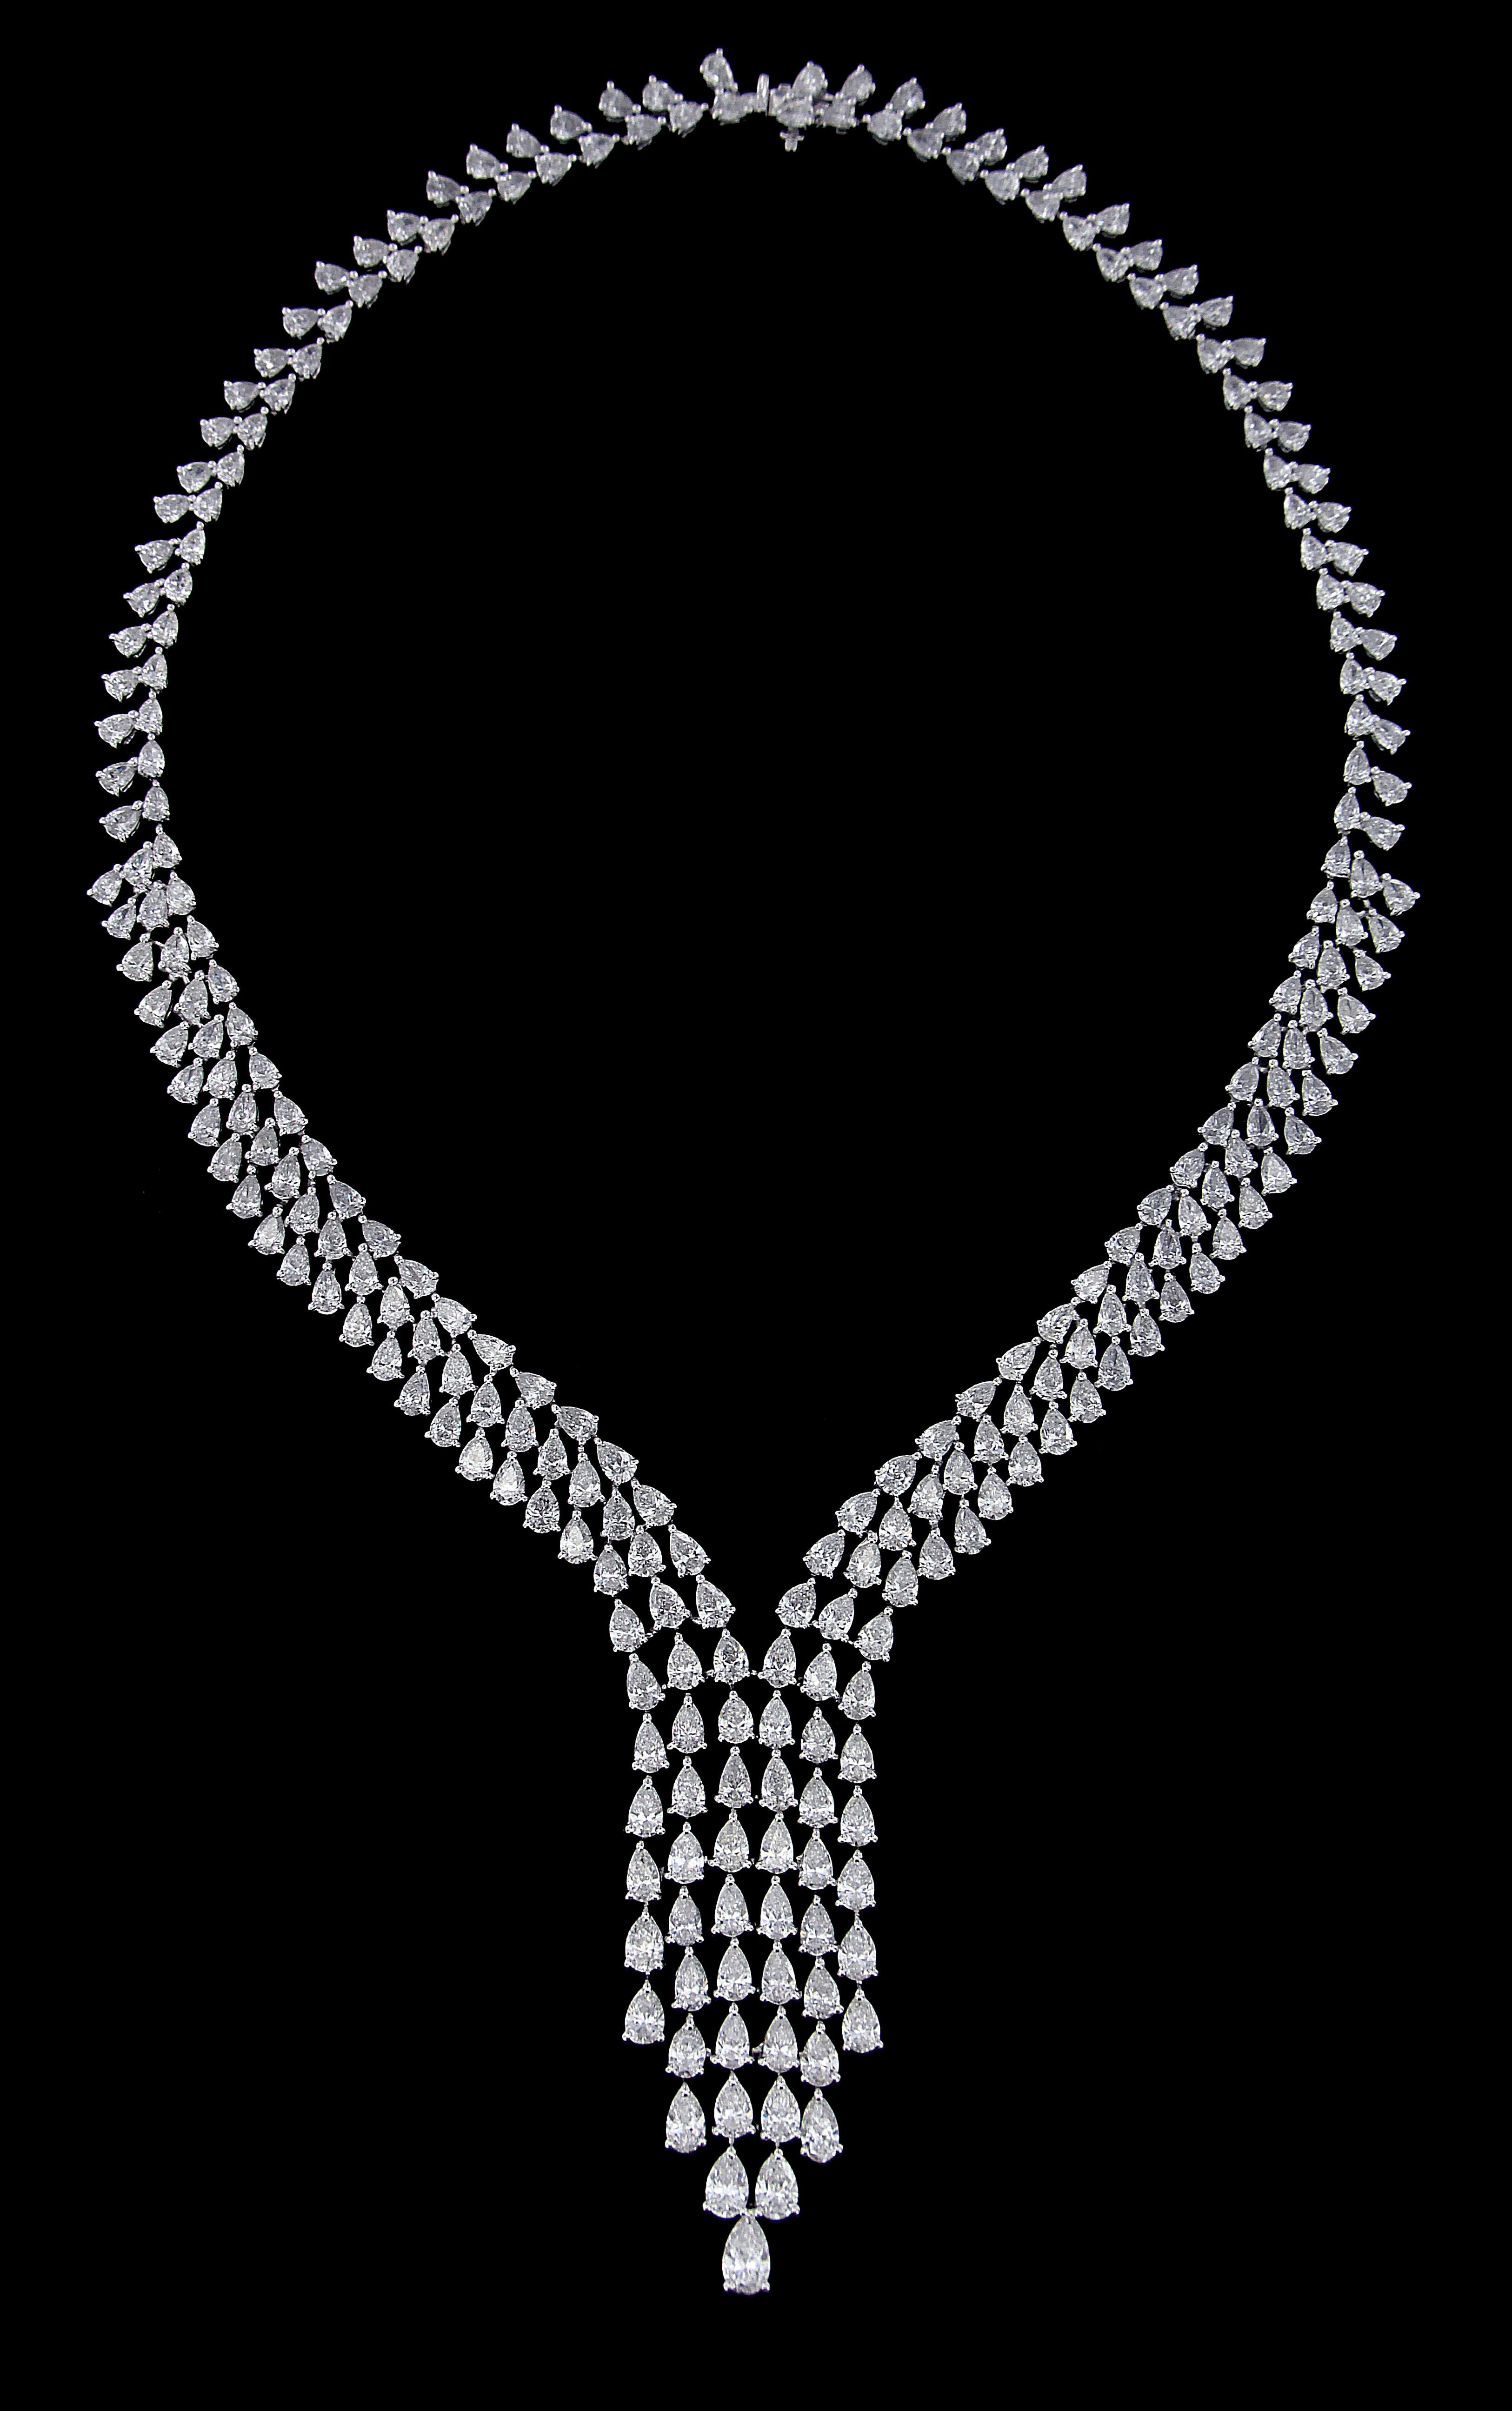 Opulent 18 Karat Gold And Diamond Multi Occasion Set :
Necklace:
Pear shaped diamonds of approximately 44.228 carats, mounted on 18 karat white gold necklace. The Necklace weighs approximately around 44.754 grams.


Please note: The charges